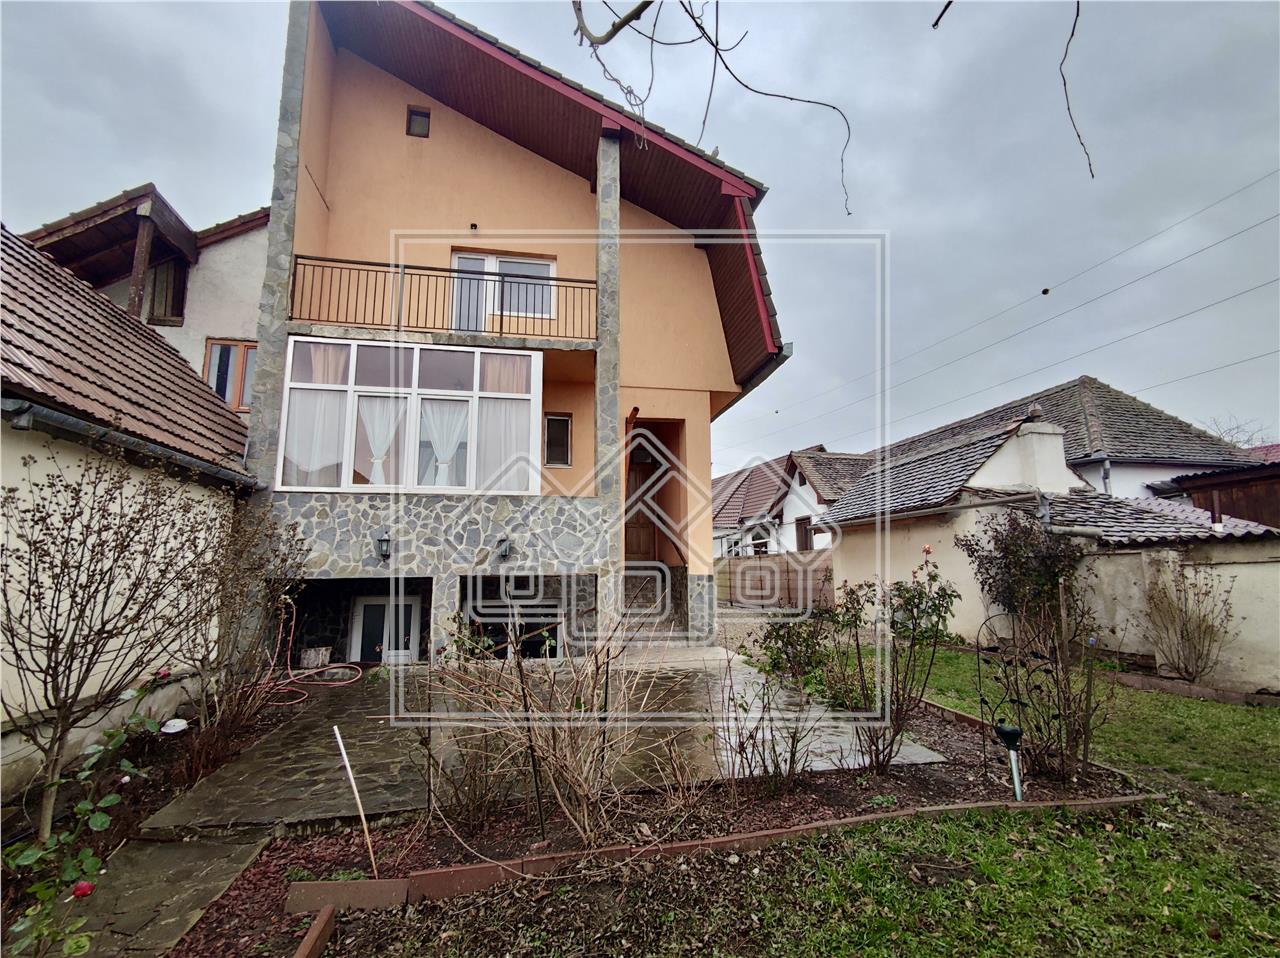 Office space for rent in Sibiu - Turnisor - Bieltz area + home and fre